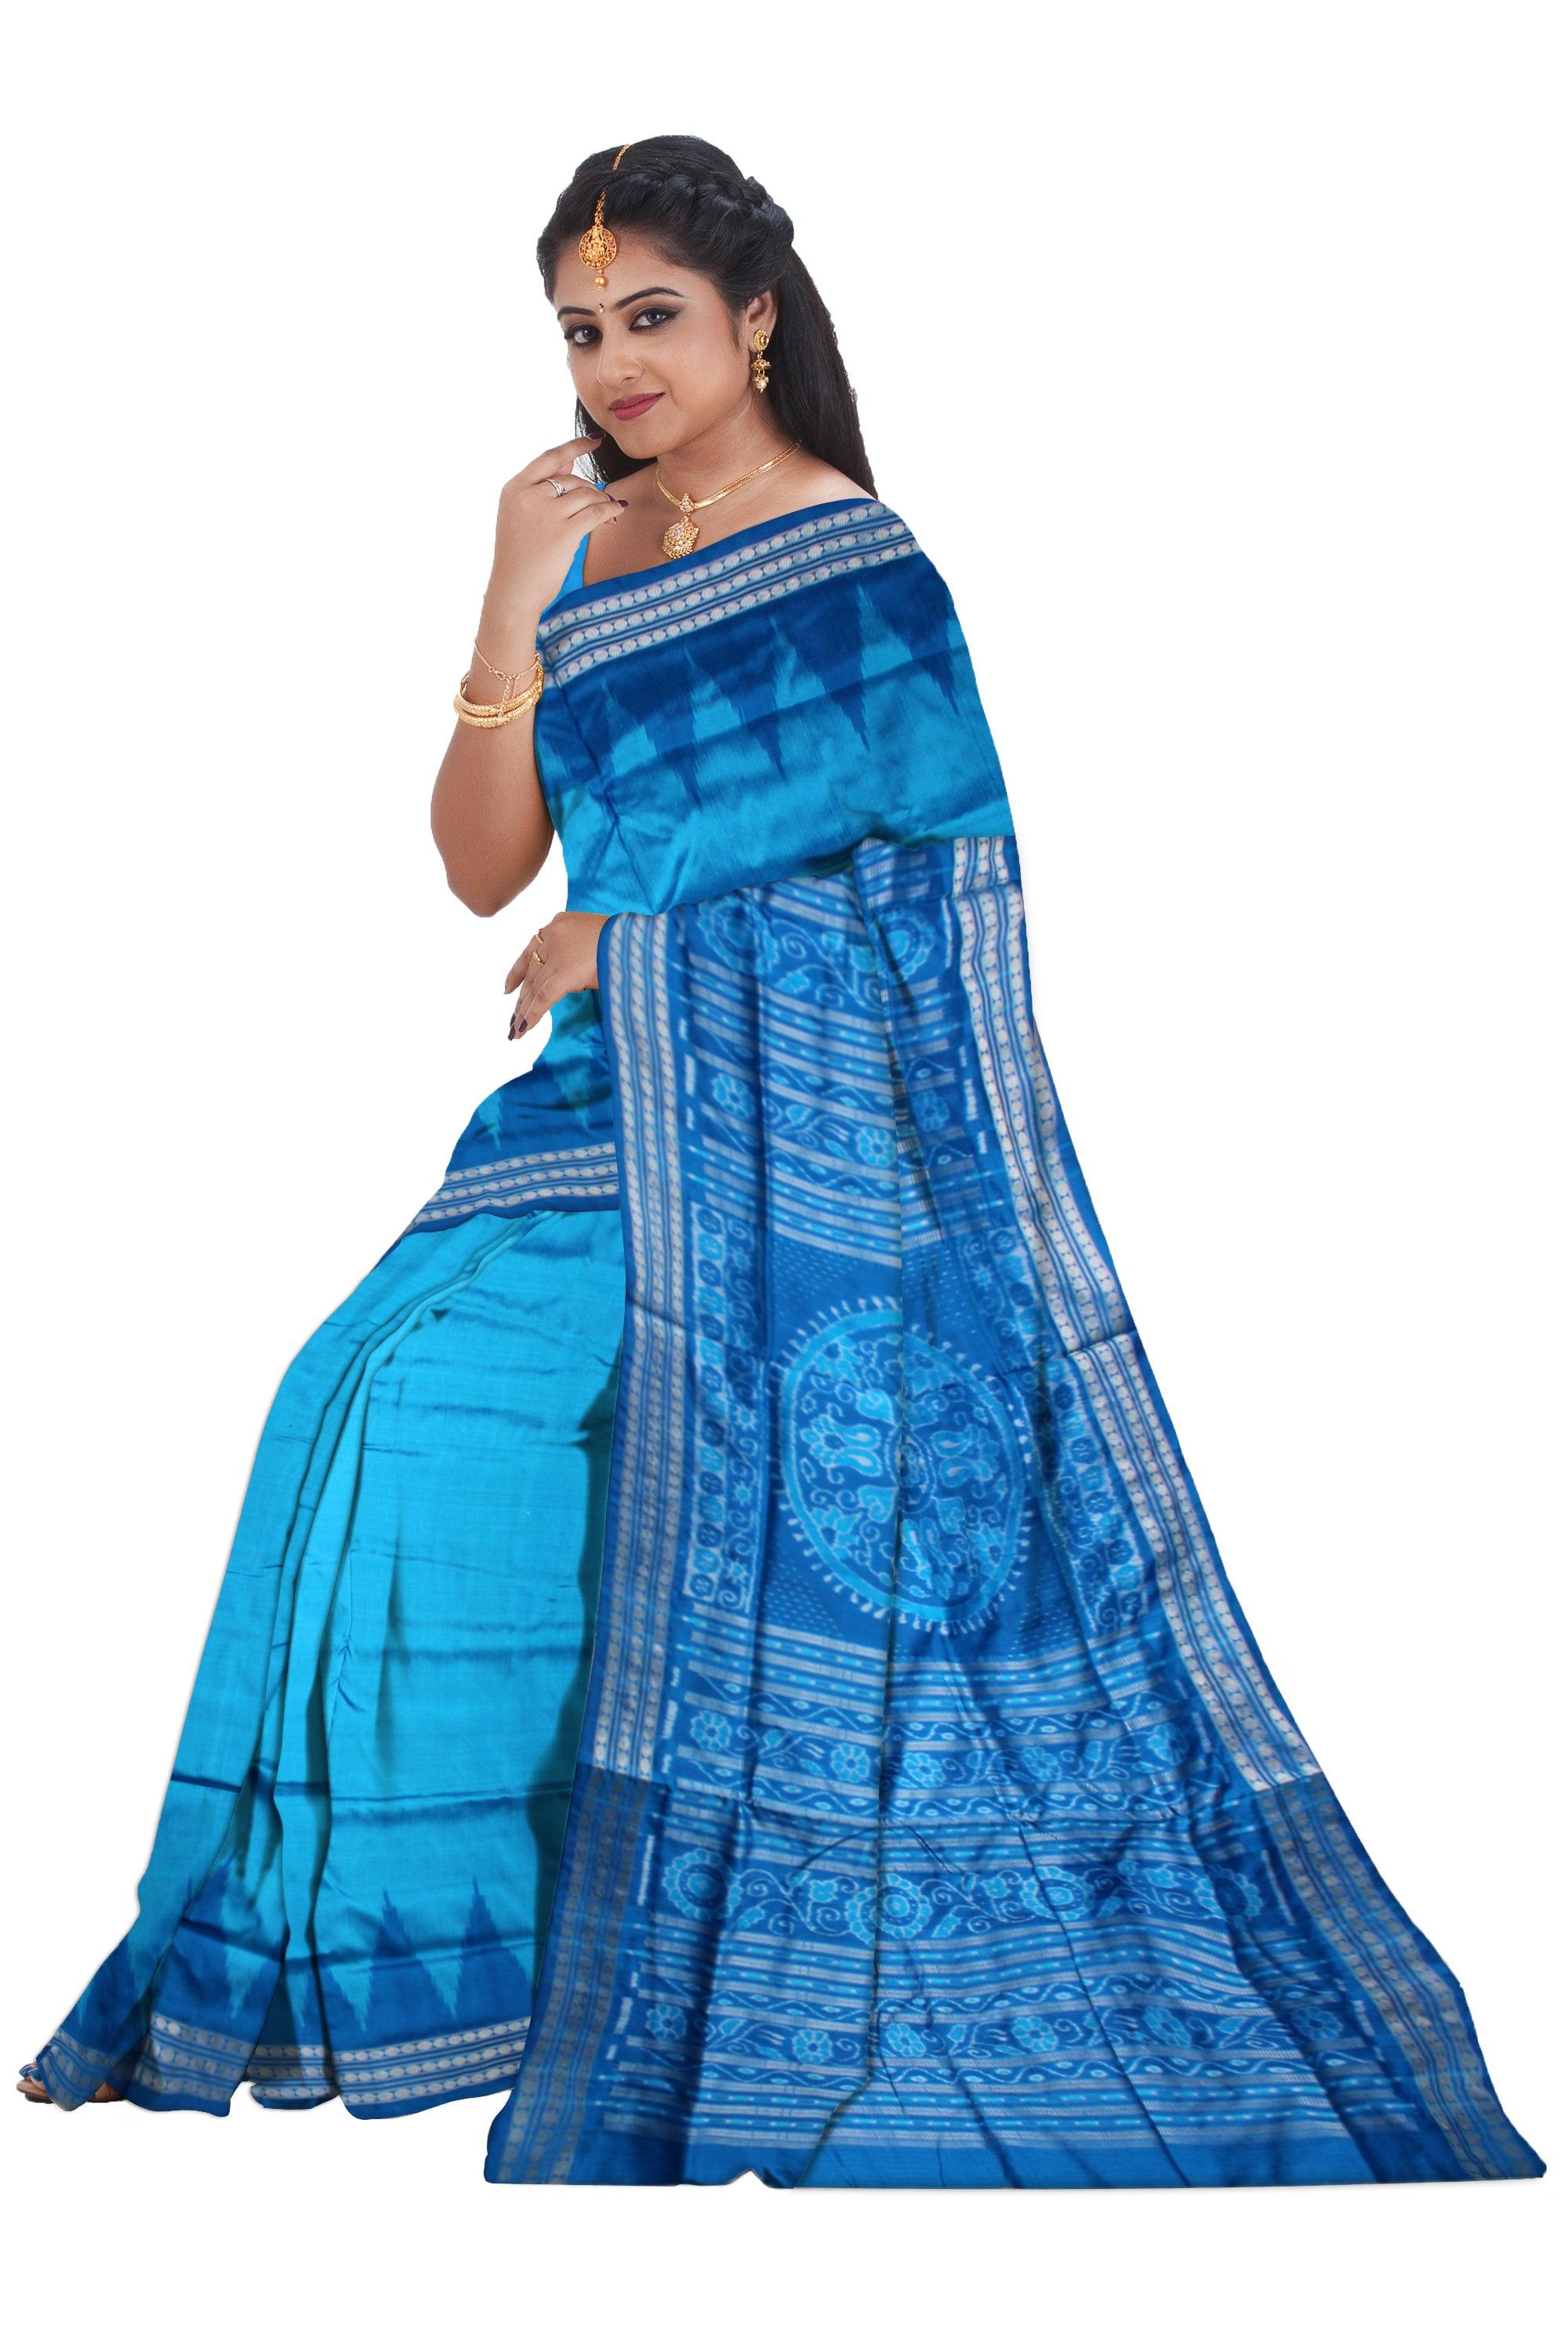 SKY AND BLUE COLOR BOOTY PATTERN PATA SAREE, WITH BLOUSE PIECE. - Koshali Arts & Crafts Enterprise